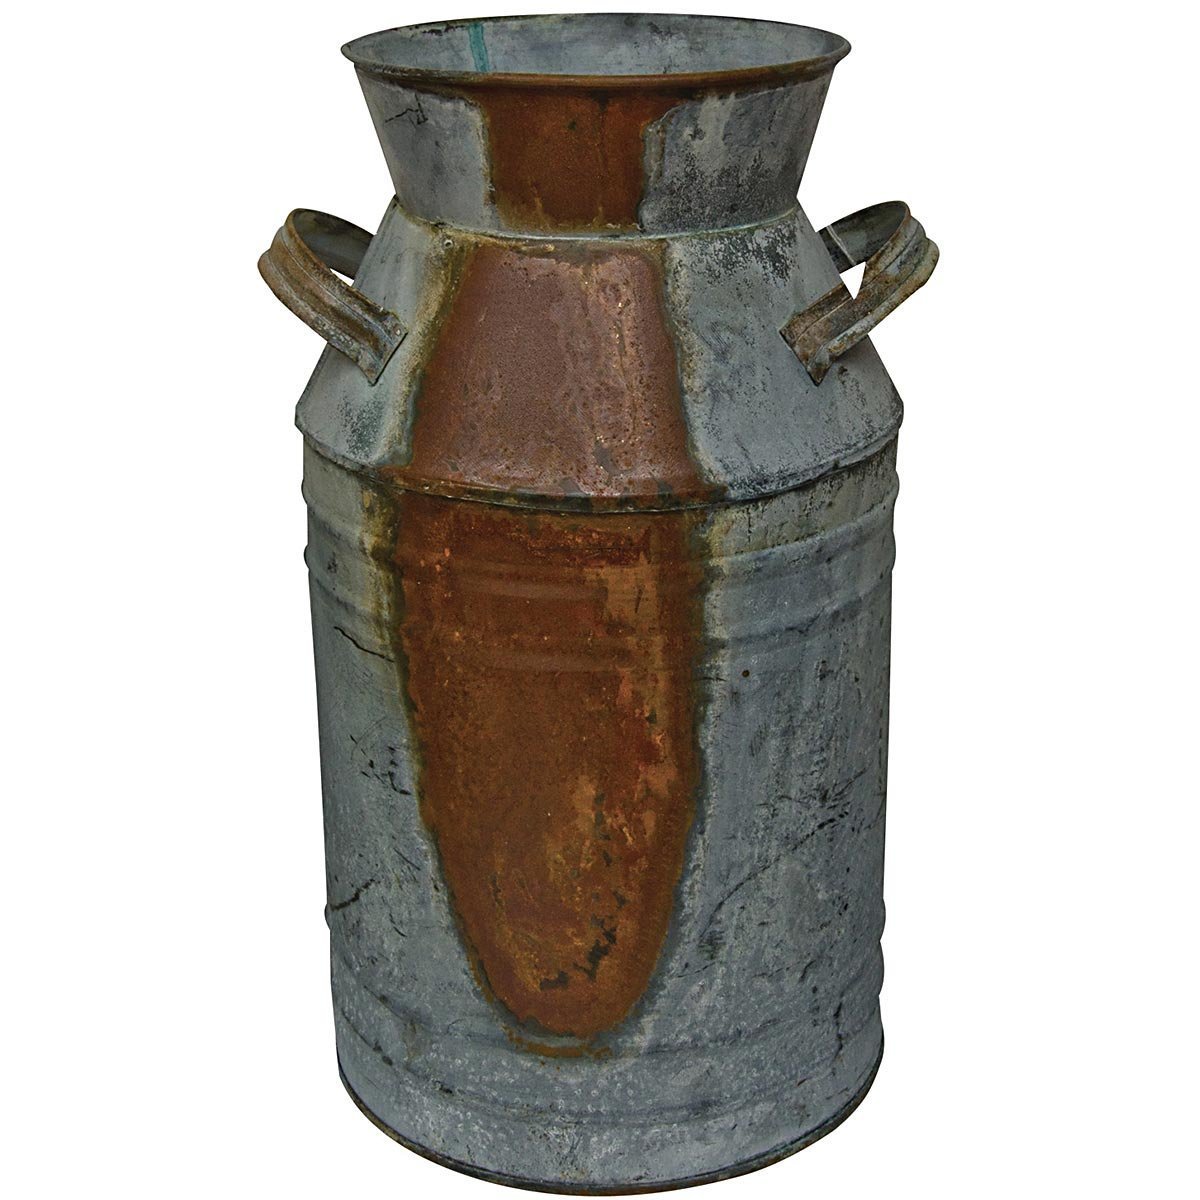 CWI-Gifts-Milk-Can-13-Galvanized-Finish-Country-Rustic-Primitive-Jug-Vase